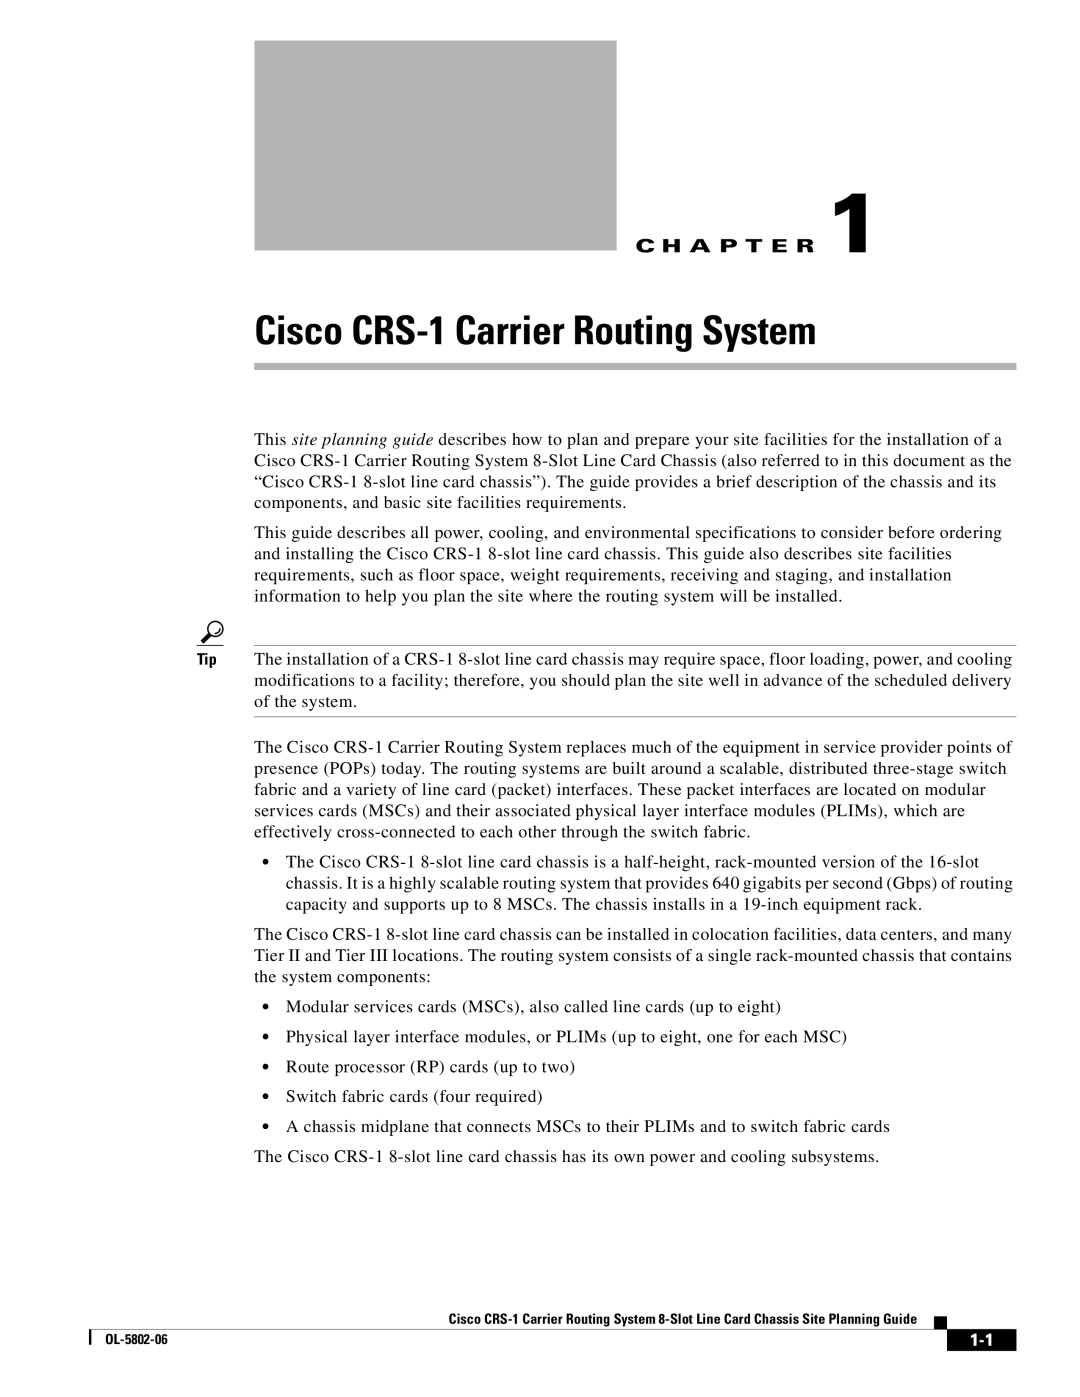 Cisco Systems specifications Cisco CRS-1Carrier Routing System, C H A P T E R 